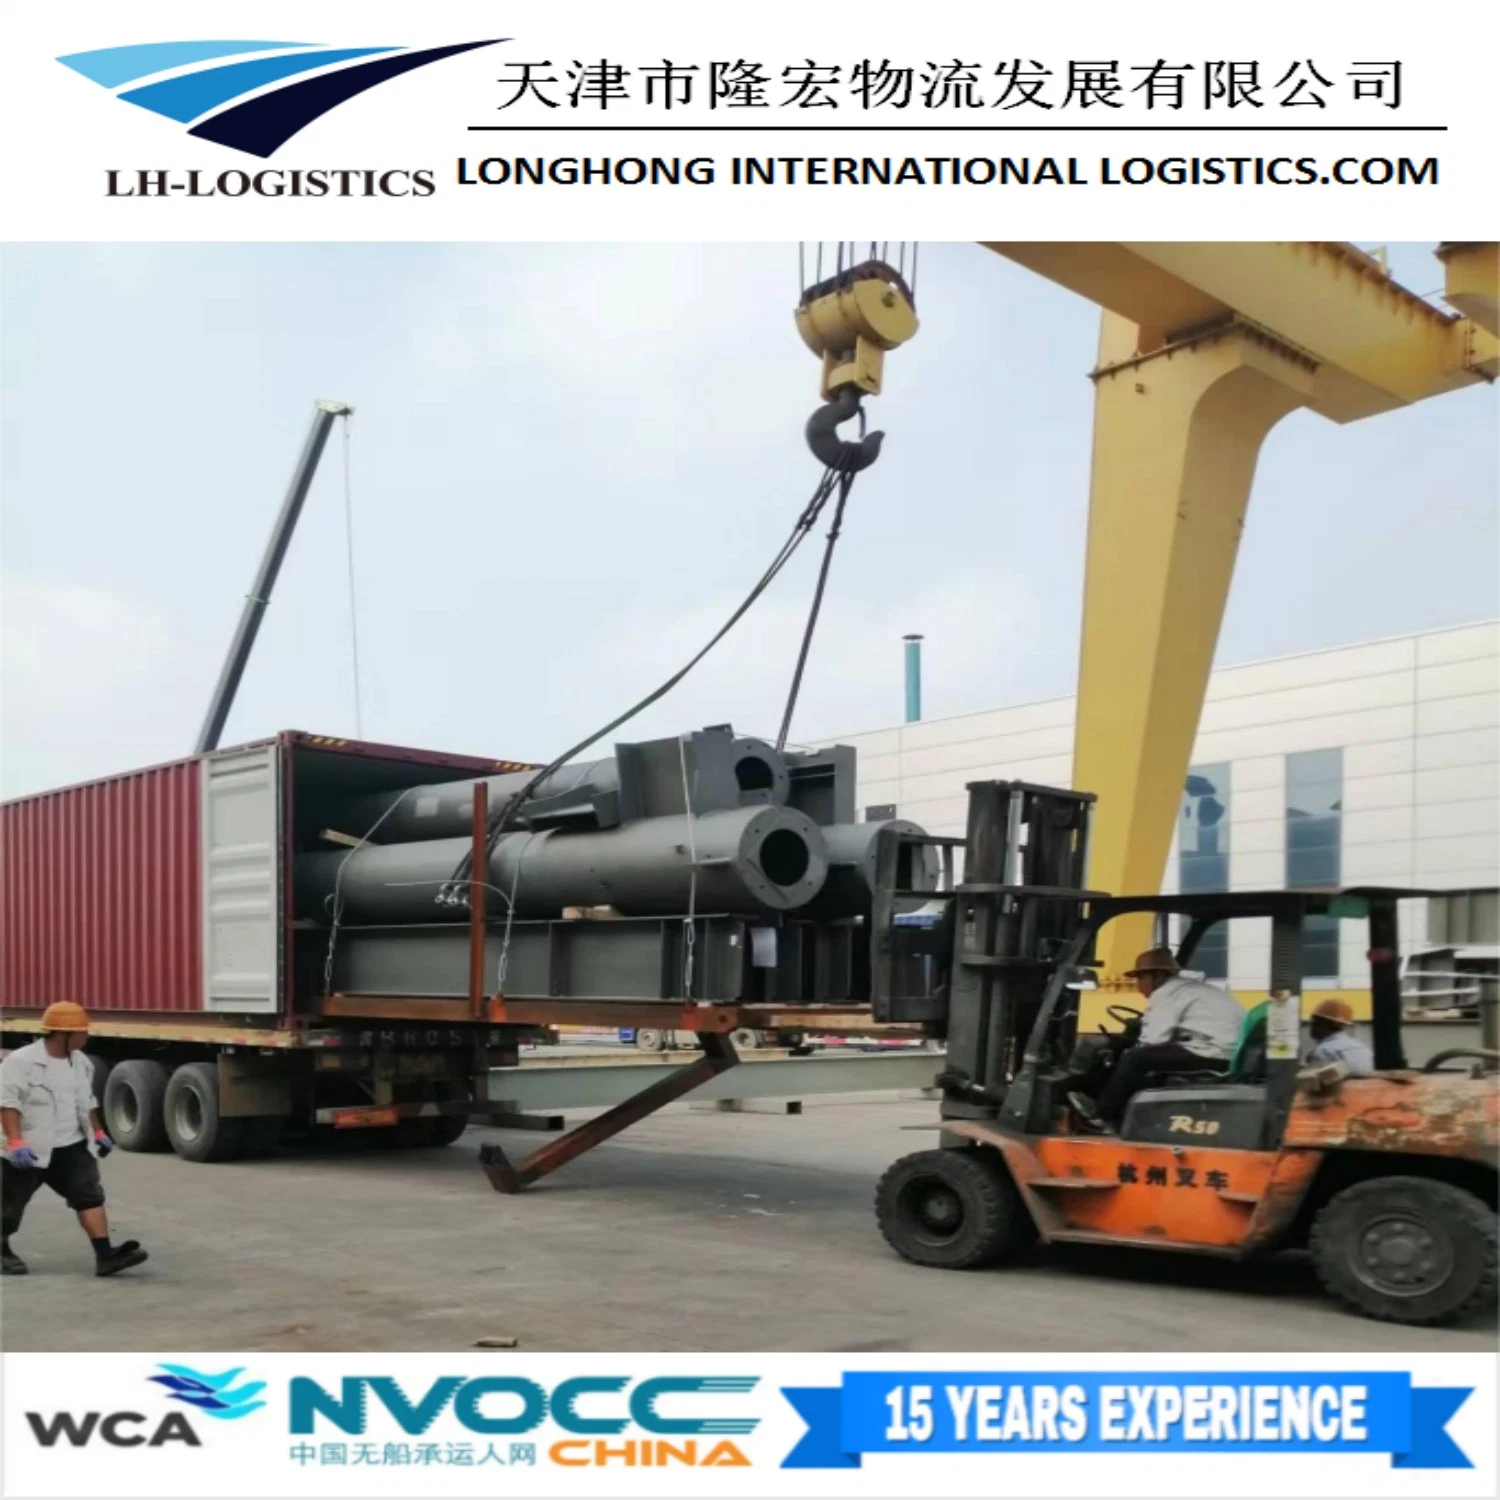 Container Equipment and Oversize Cargo Transportation From China to Kyrghyzstan/Uzbekistan Railway